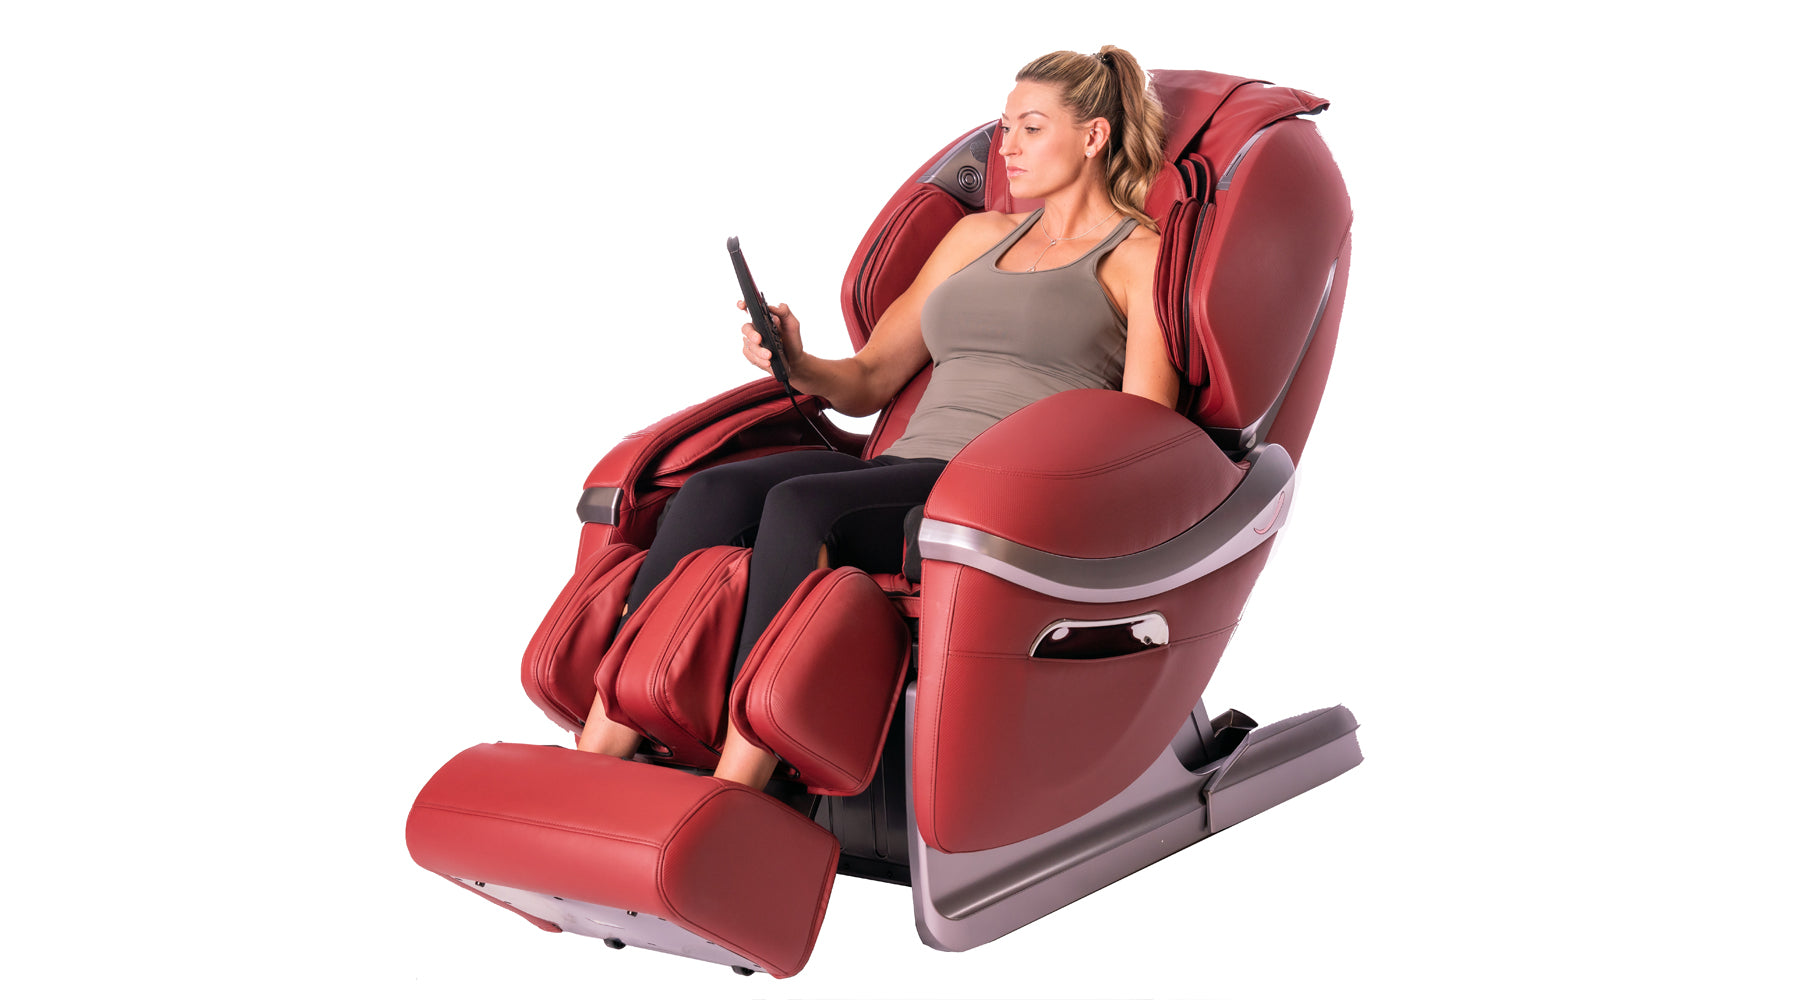 Massage Chairs Made in the USA